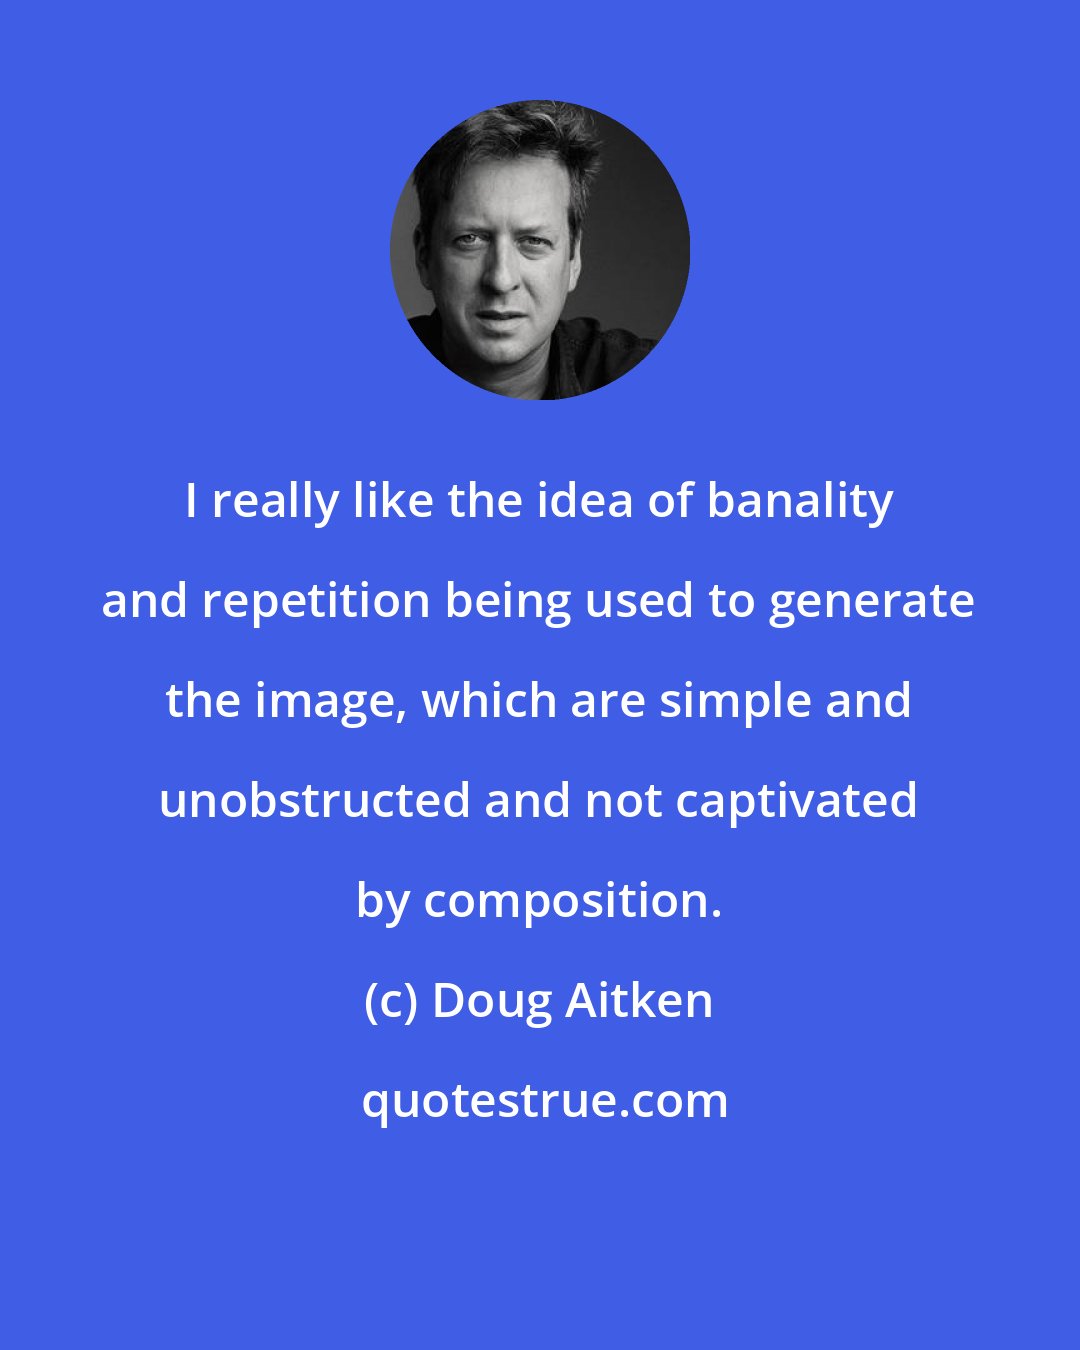 Doug Aitken: I really like the idea of banality and repetition being used to generate the image, which are simple and unobstructed and not captivated by composition.